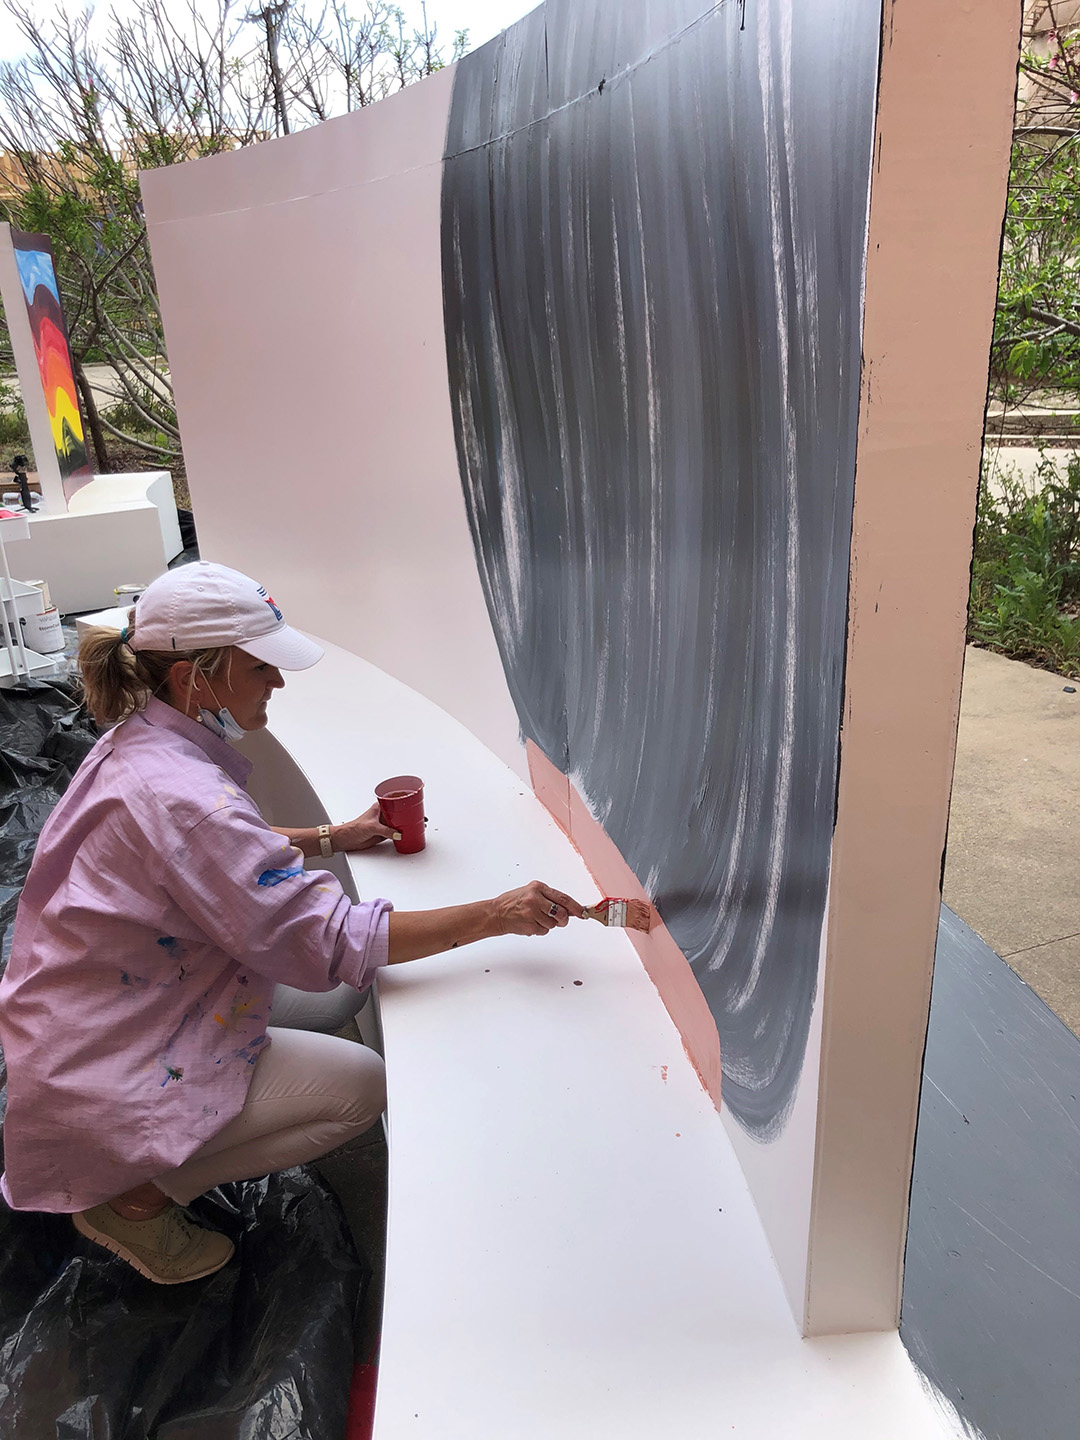 a woman wearing a baseball cap and face mask around her chin painting a large mural on a freestanding wooden structure in an outside area